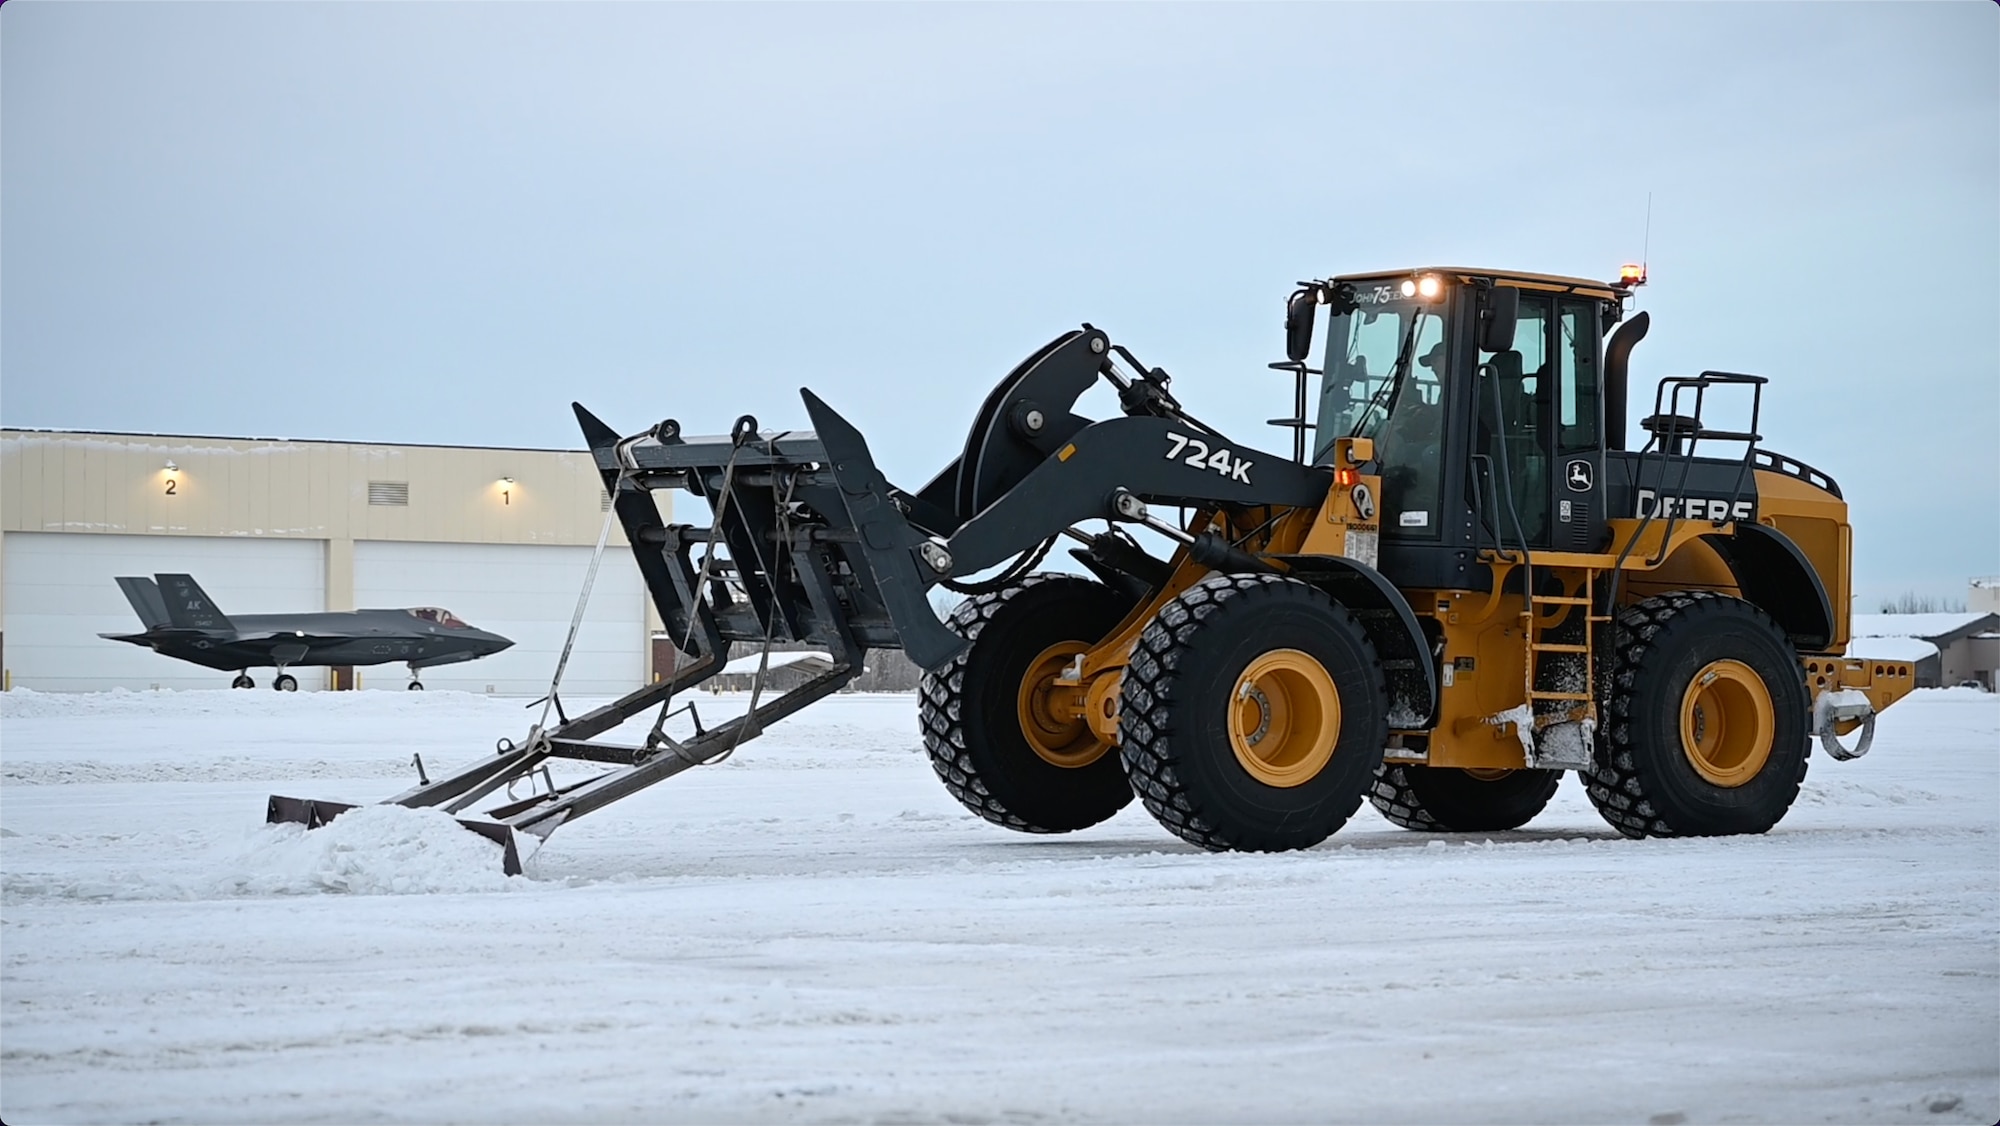 A 354th Civil Engineering Squadron pavements and construction equipment operator clears ice from the flight line at Eielson Air Force Base, Alaska, Jan. 13, 2022.